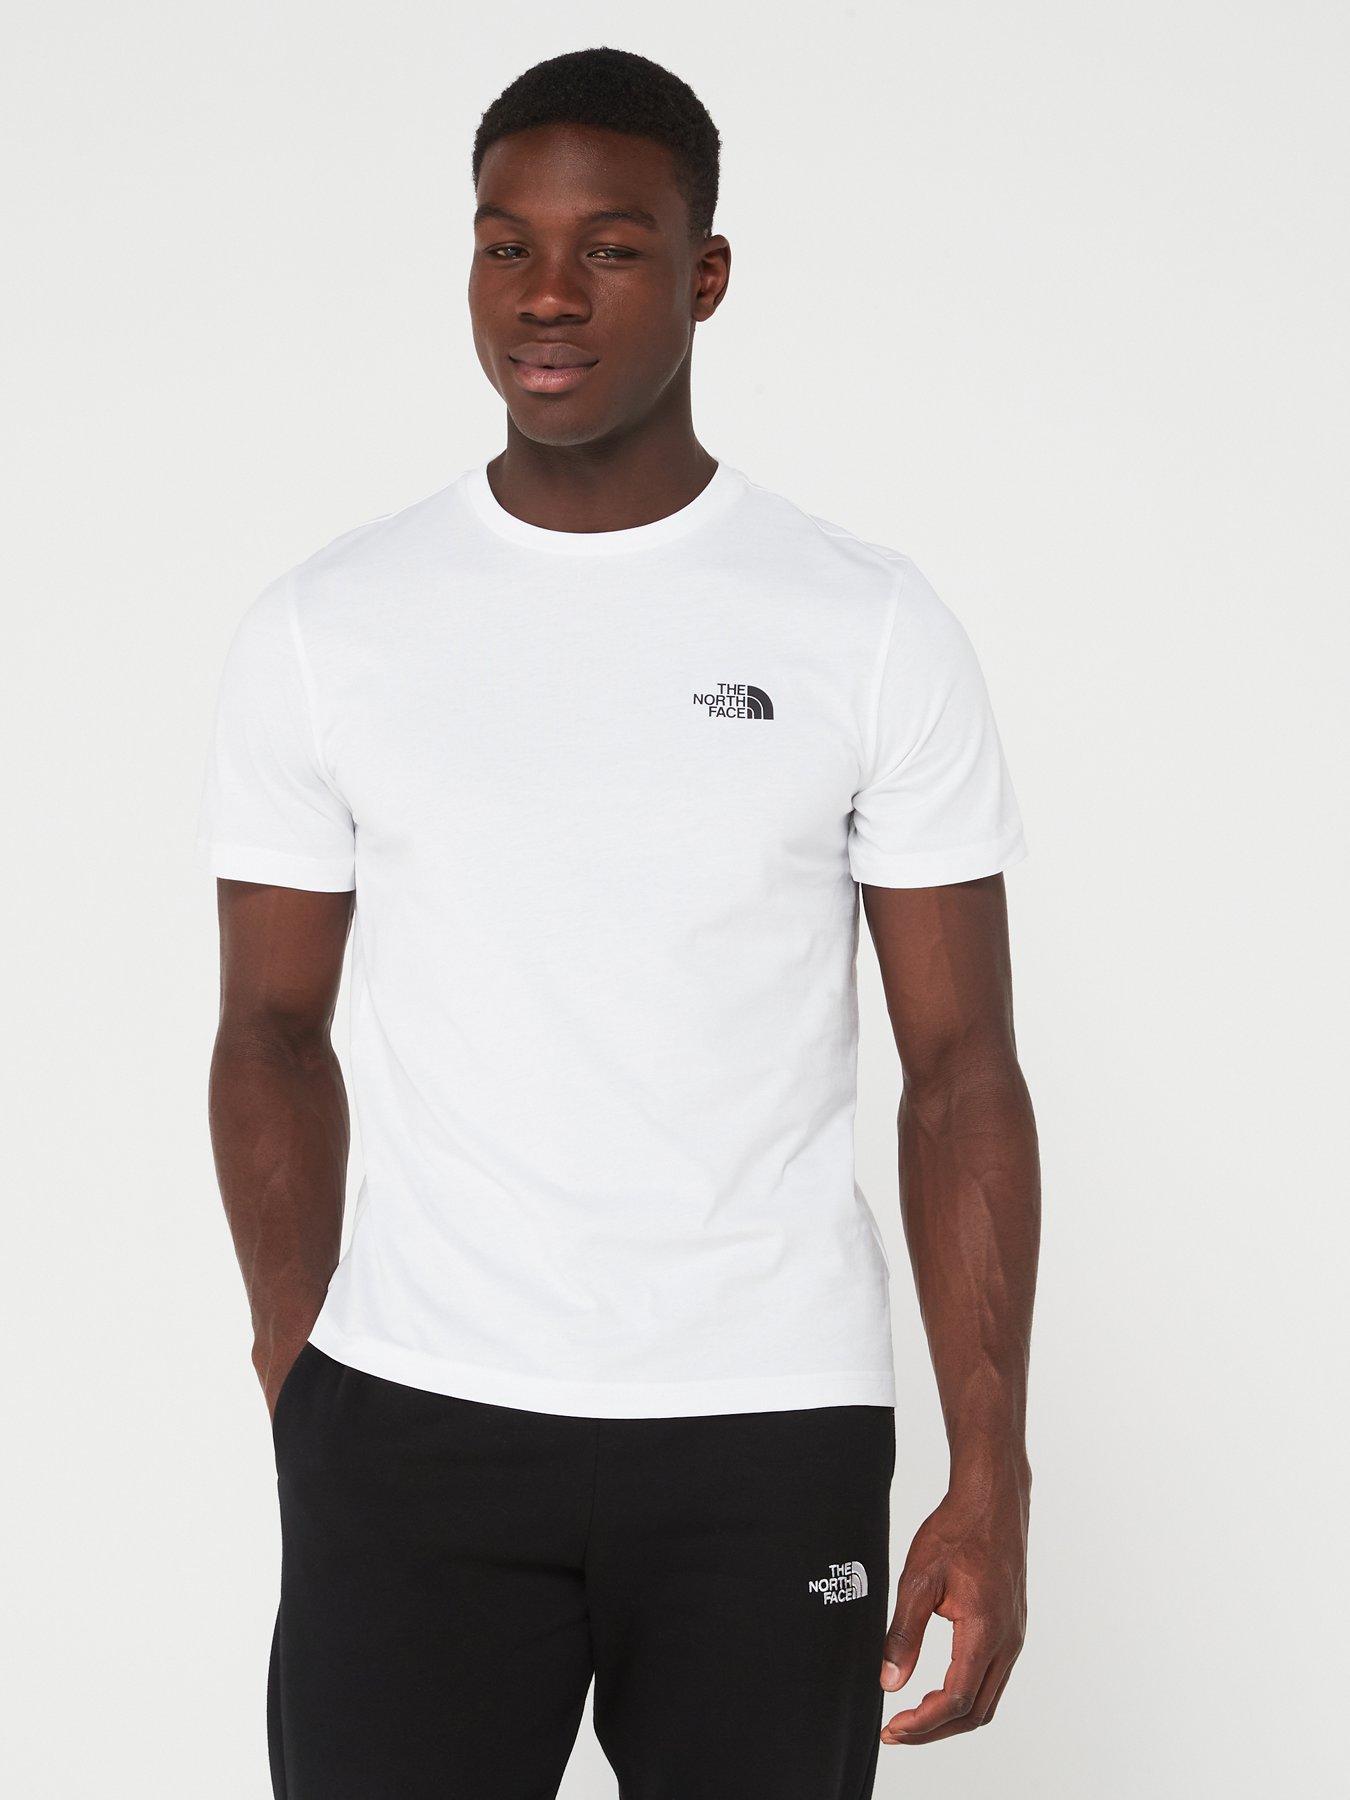 The North Face Easy Men's T-Shirt